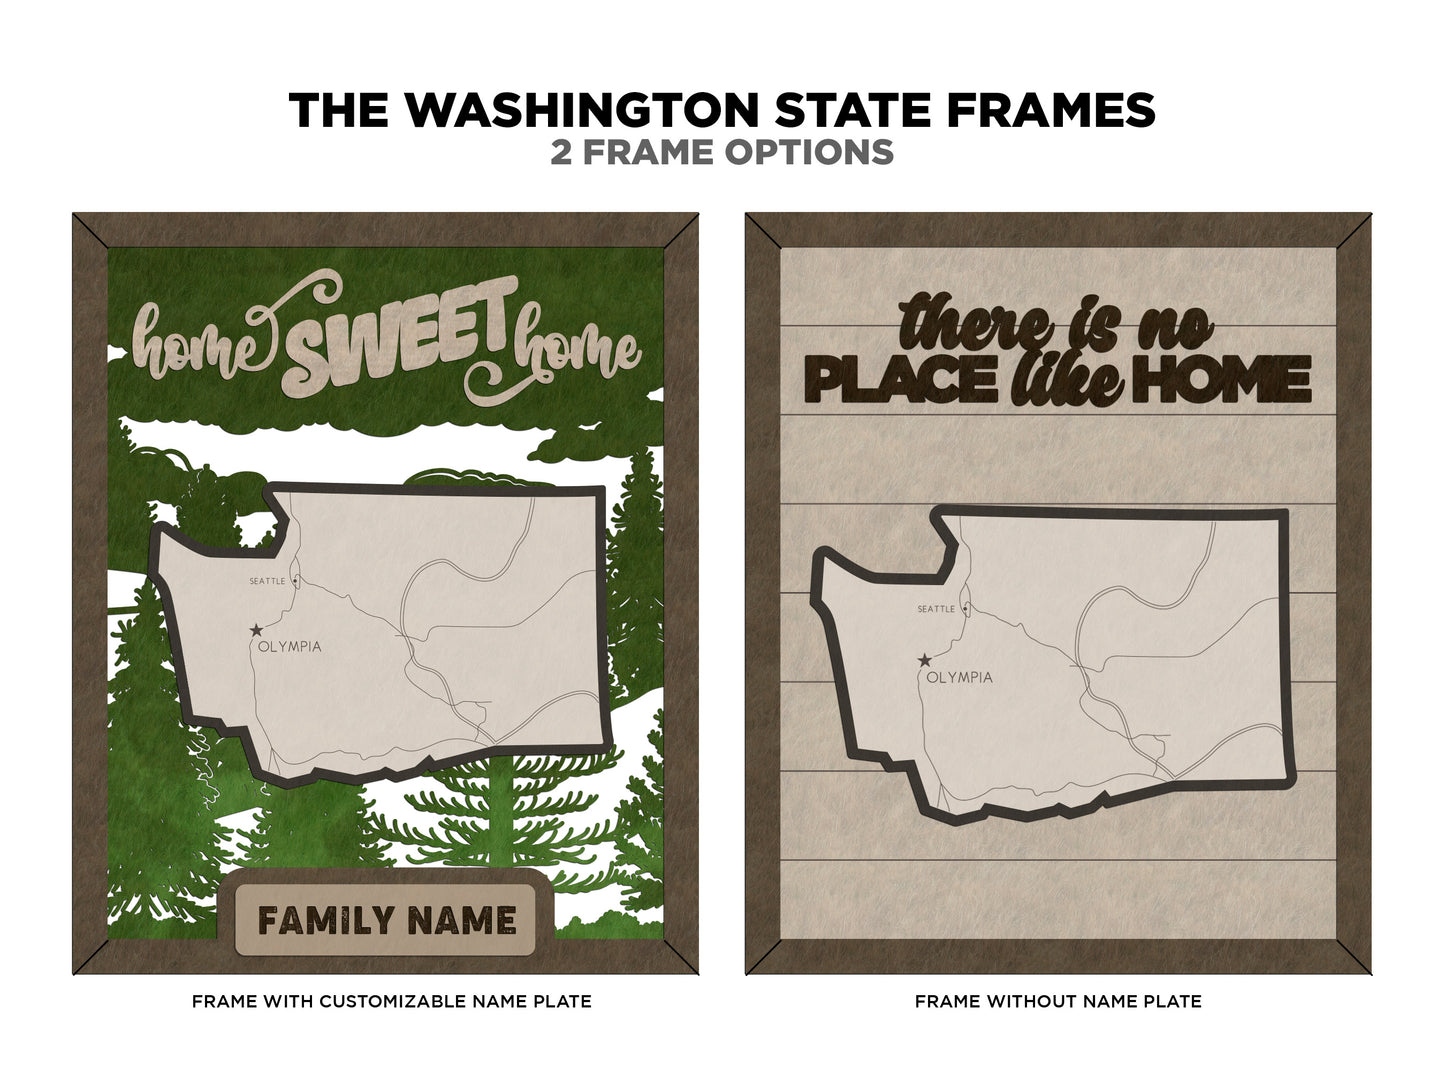 The Washington State Frame - 13 text options, 12 backgrounds, 25 icons Included - Make over 7,500 designs - Glowforge & Lightburn Tested